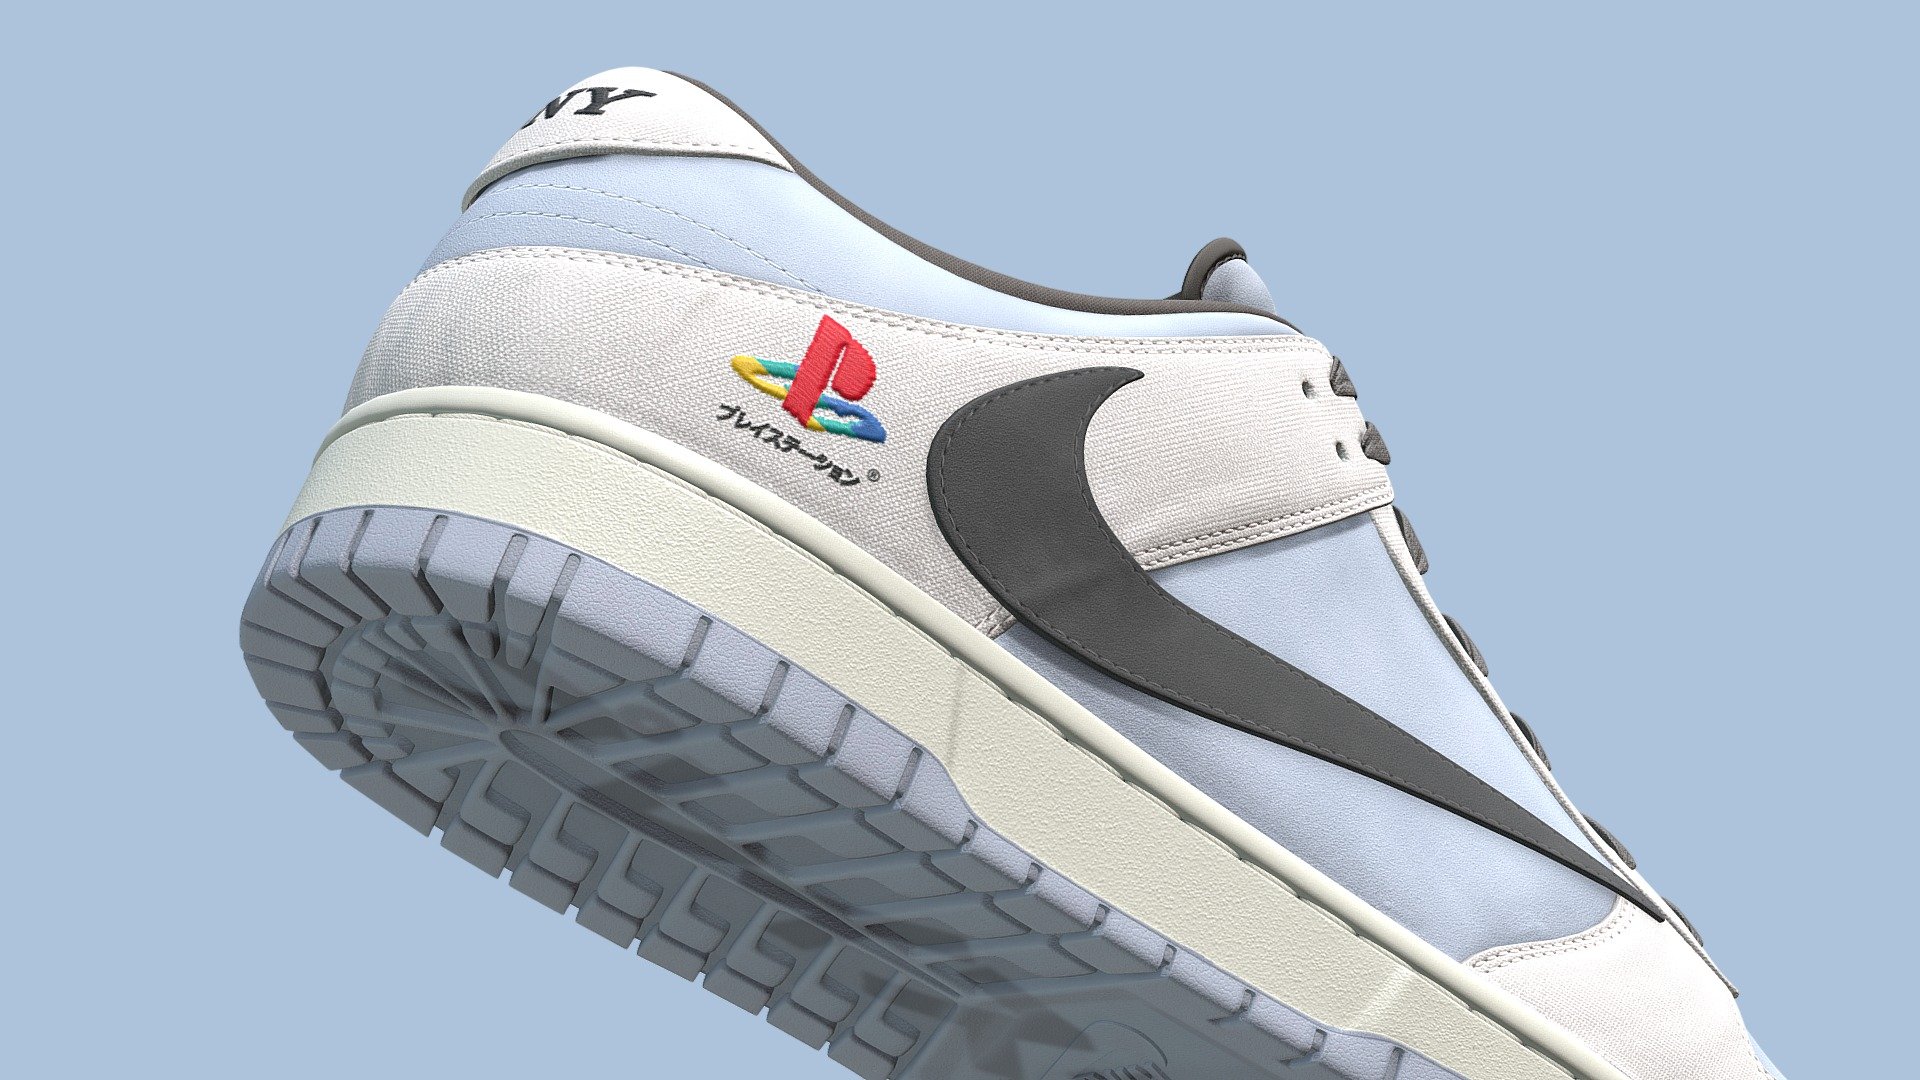 Playstation x Travis Scott Nike Dunks made entirely in Blender and textured in Substance Painter. Released in 2020 this collaboration between Playstation and Travis Scott was extremely limited, available to only friends and family, and five lucky fans who were drawn out of a raffle. The shoes features a biege canvas material in place of the usual leather accented by a light blue suede. Travis Scotts signature reverse swoosh, along with Sony and Playstation branding can be found on the shoe.

Every detail was made in the recreation of this shoe, from the embroidered logos to the subtlety of each material nothing went overlooked. The model itself is subdivision ready and consists of four texture sets. The model on display is at Subdivision level 1 and each texture is at 4096x4096 resolution

Download File Contents:
1. Native Blender file with linked textures
2. Folder containing all textures in 4096x4096 png format. 
3. FBX and OBJ versions of the shoes - Playstation Nike Dunk Low Shoe - Buy Royalty Free 3D model by Joe-Wall (@joewall) 3d model